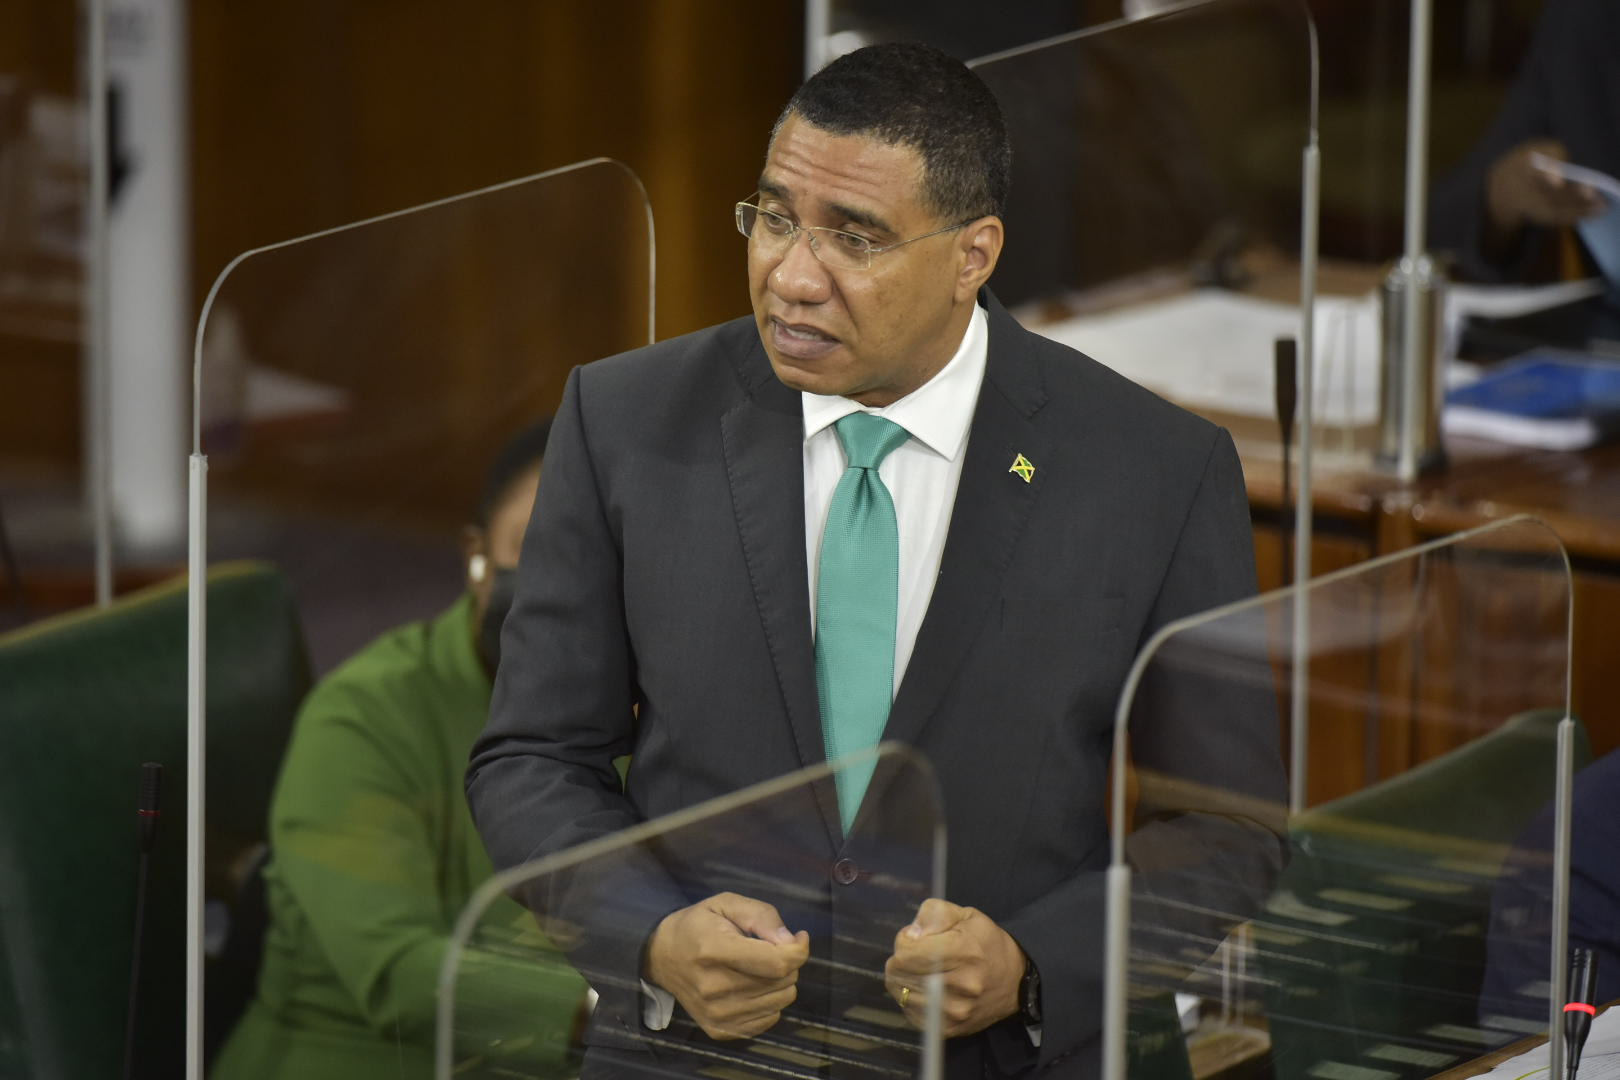 Prime Minister the Most Hon. Andrew Holness makes his contribution to the 2021/22 Budget Debate in the House of Representatives on March 18. 